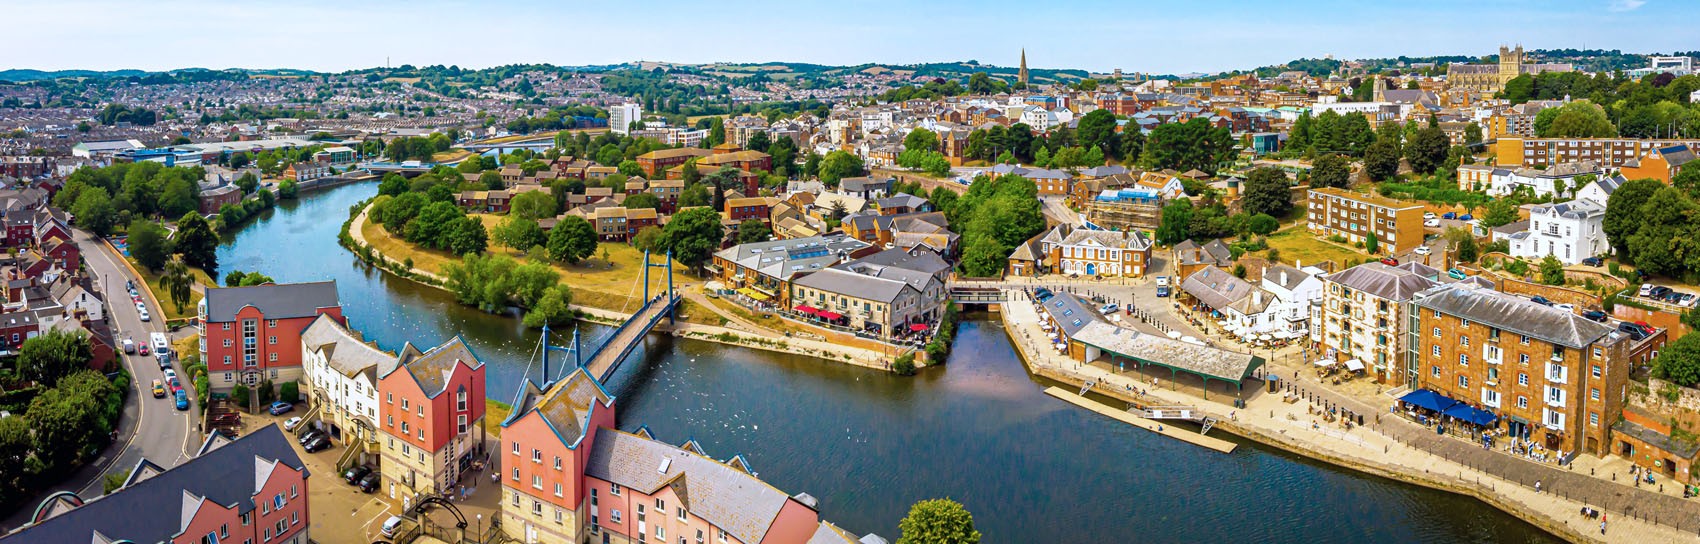 An aerial view of Exeter Quay and the River Exe. Photograph by ALEXEY FEDORENKO